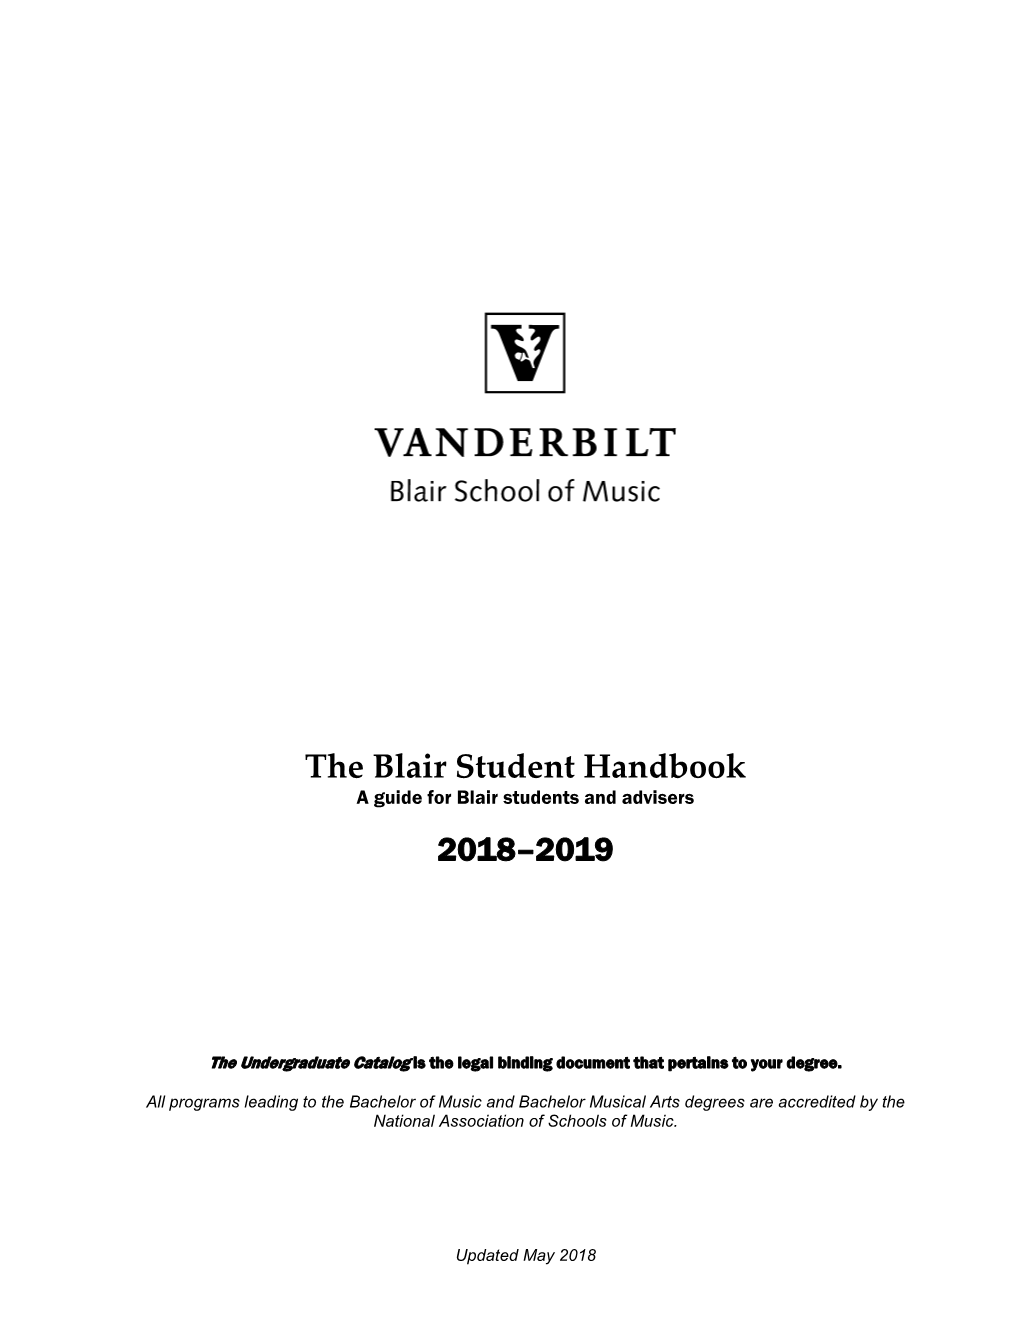 Blair Student Handbook a Guide for Blair Students and Advisers